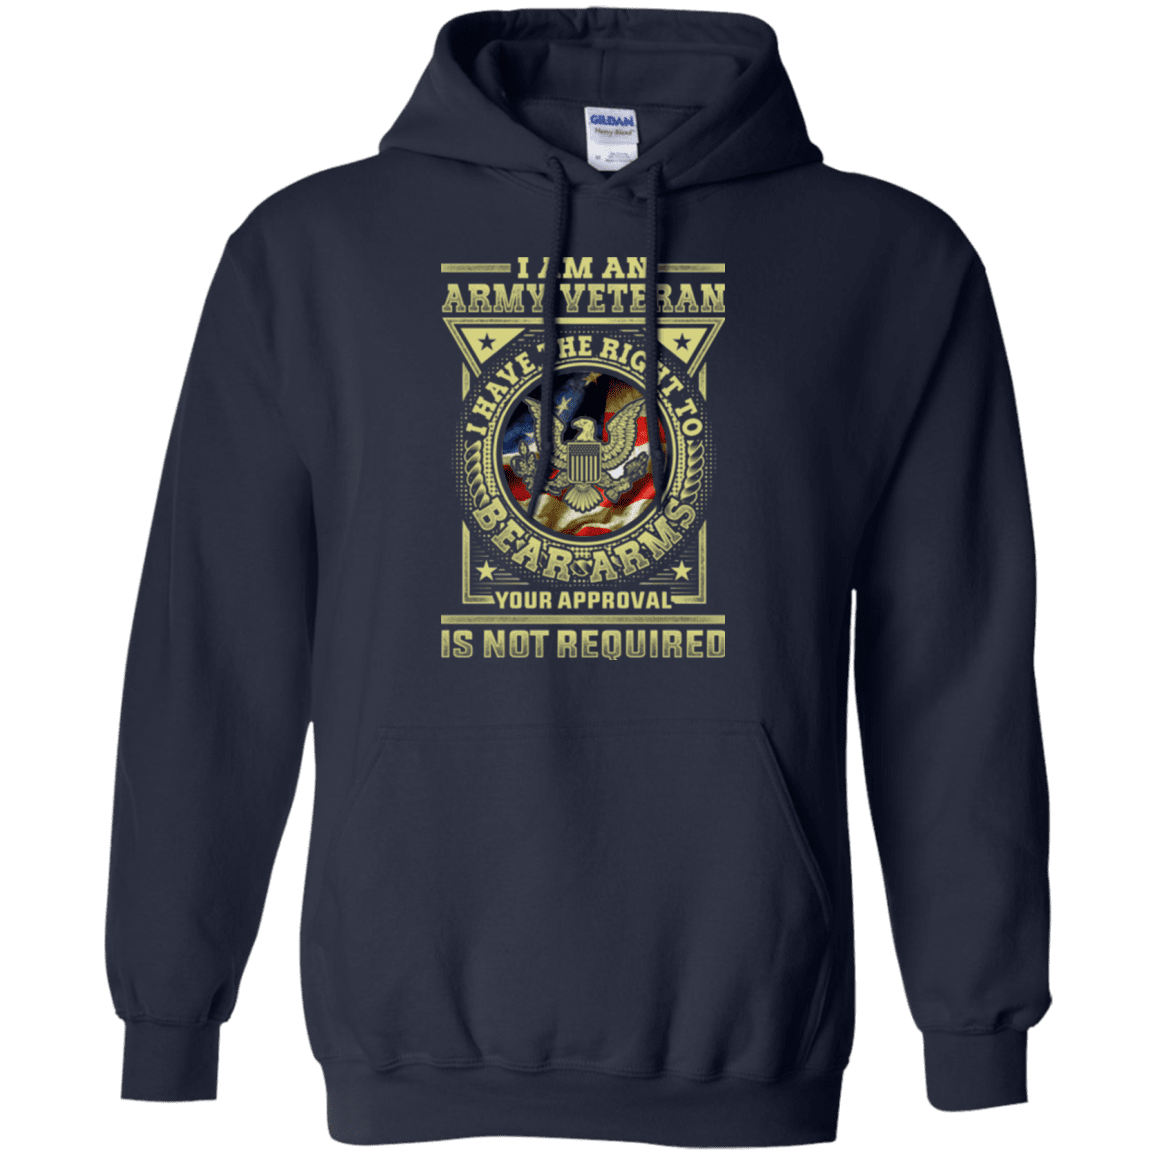 Army Veteran Have the Right To Bear Arms Men Front T Shirts-TShirt-Army-Veterans Nation